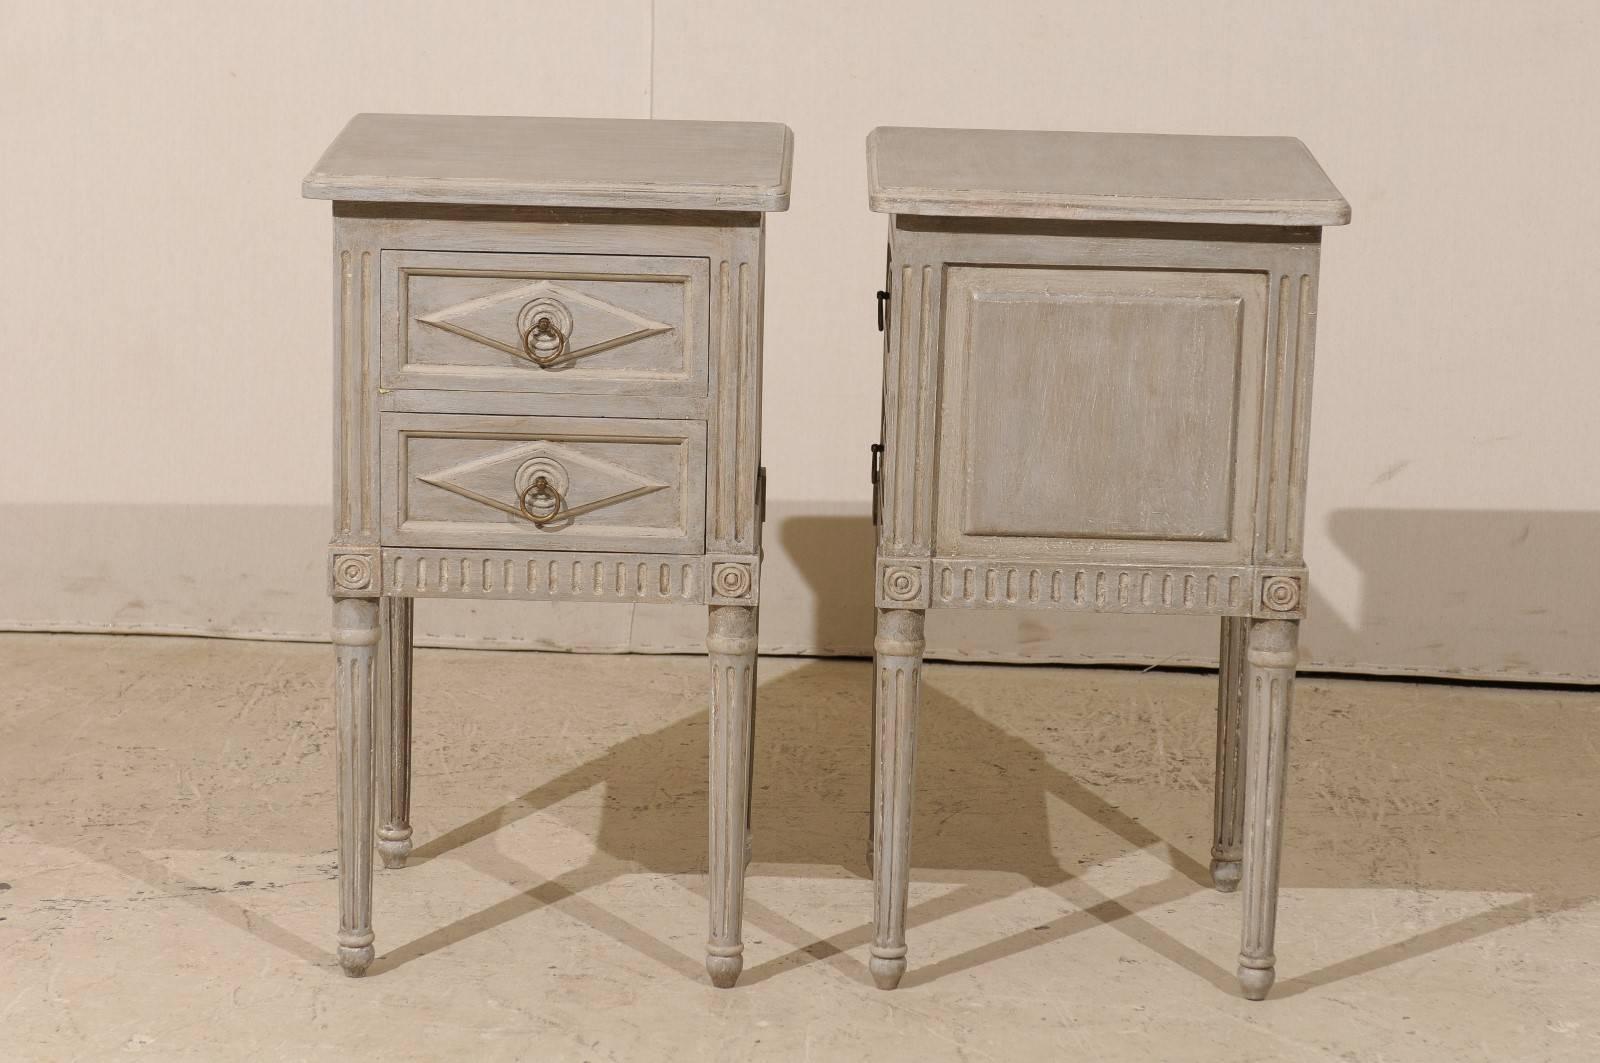 Unknown Pair of Small Sized Two-Drawer Painted Wood Nightstand Tables in Neutral Grey